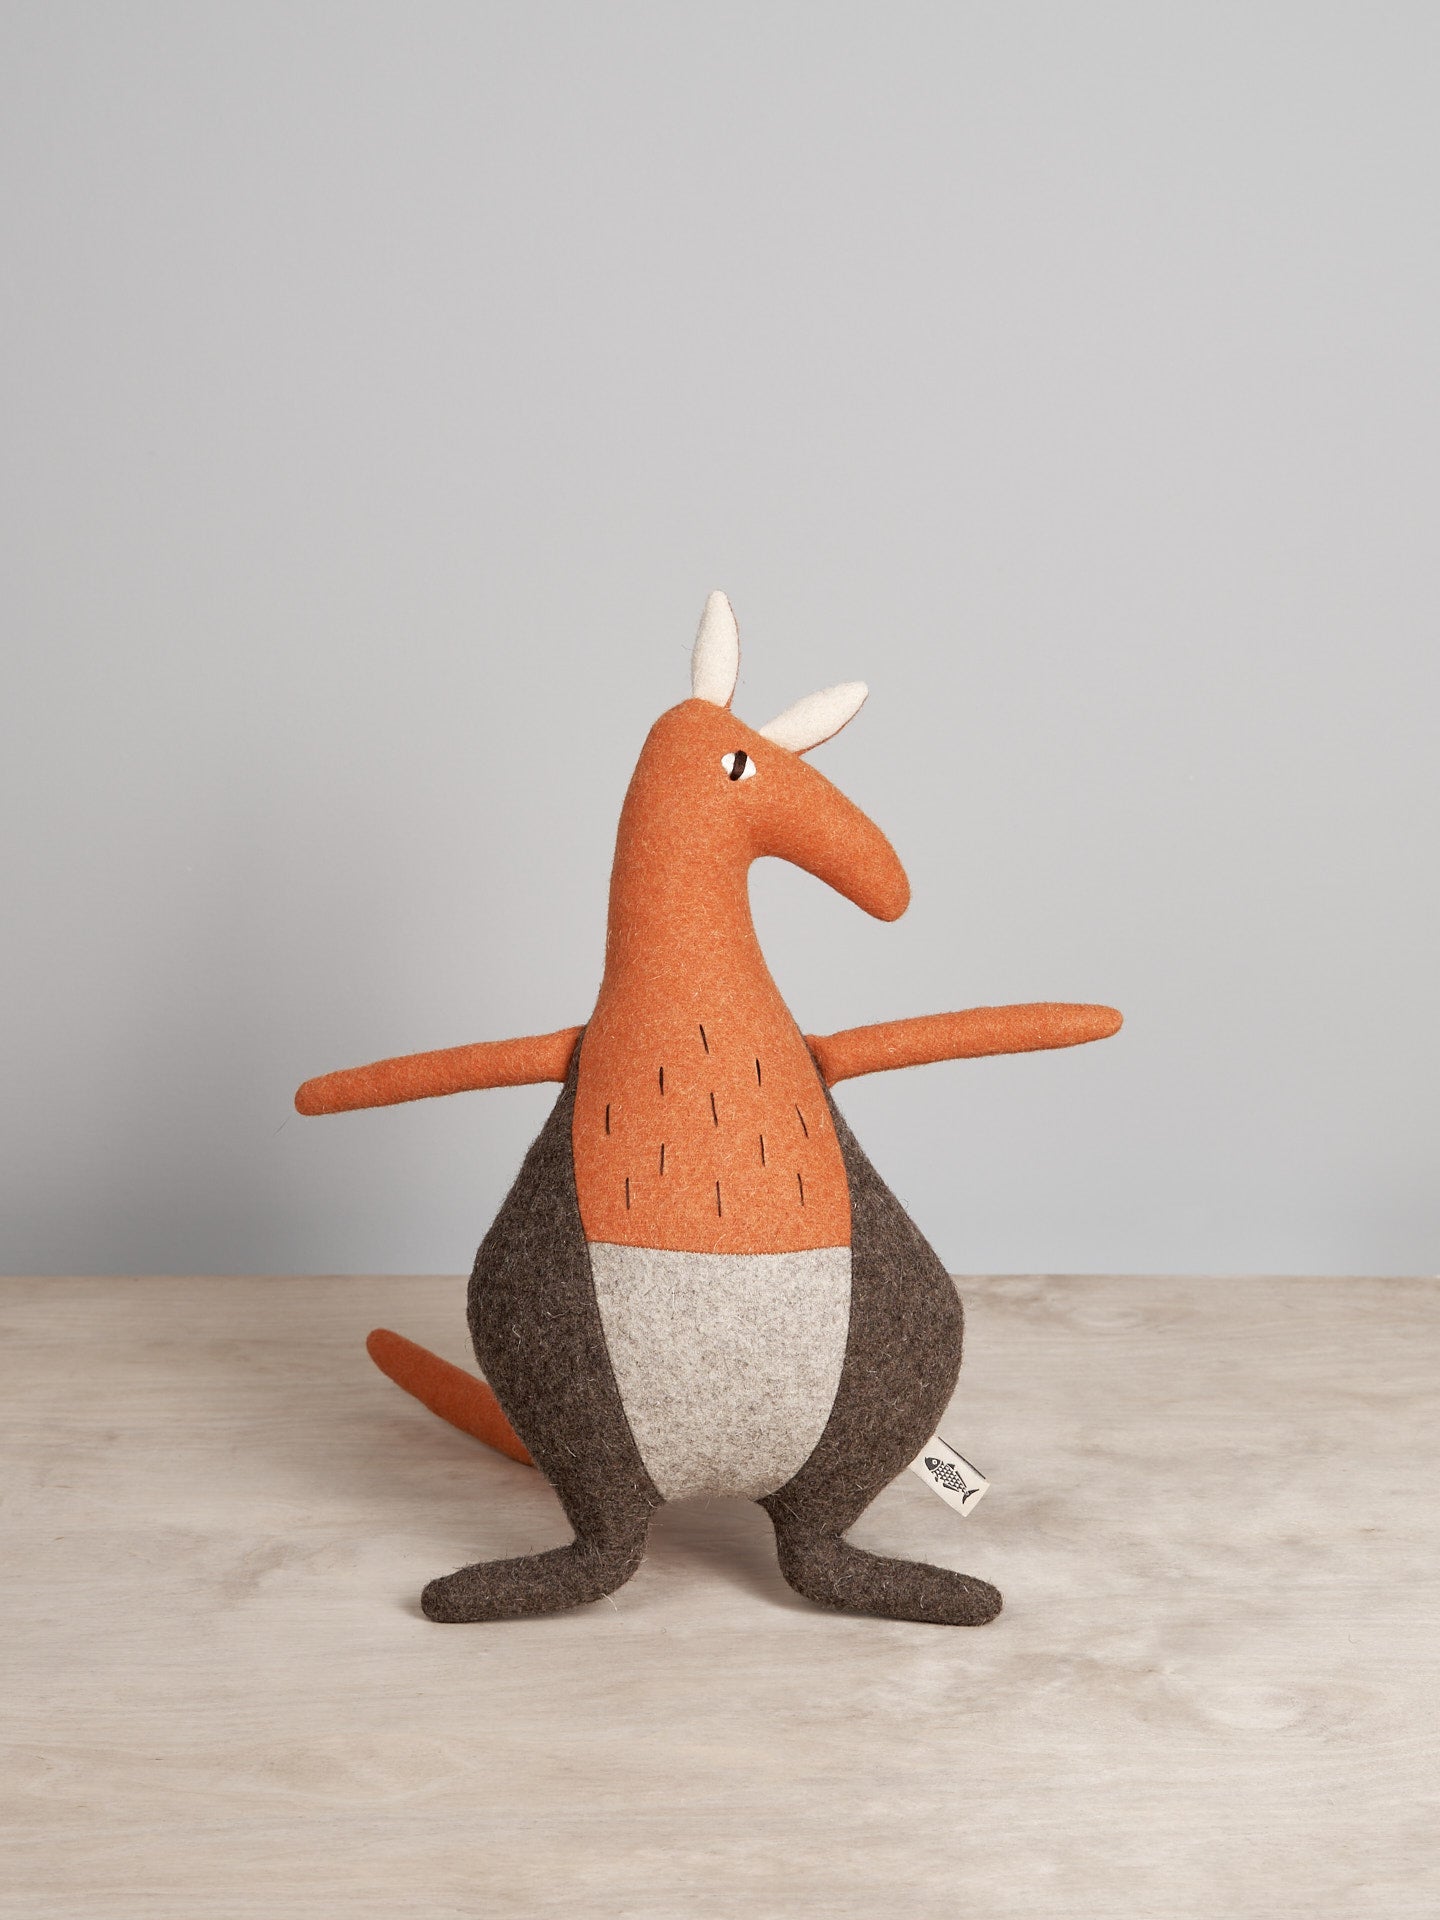 A JOE, the Kangaroo toy sitting on a wooden table by Carapau.